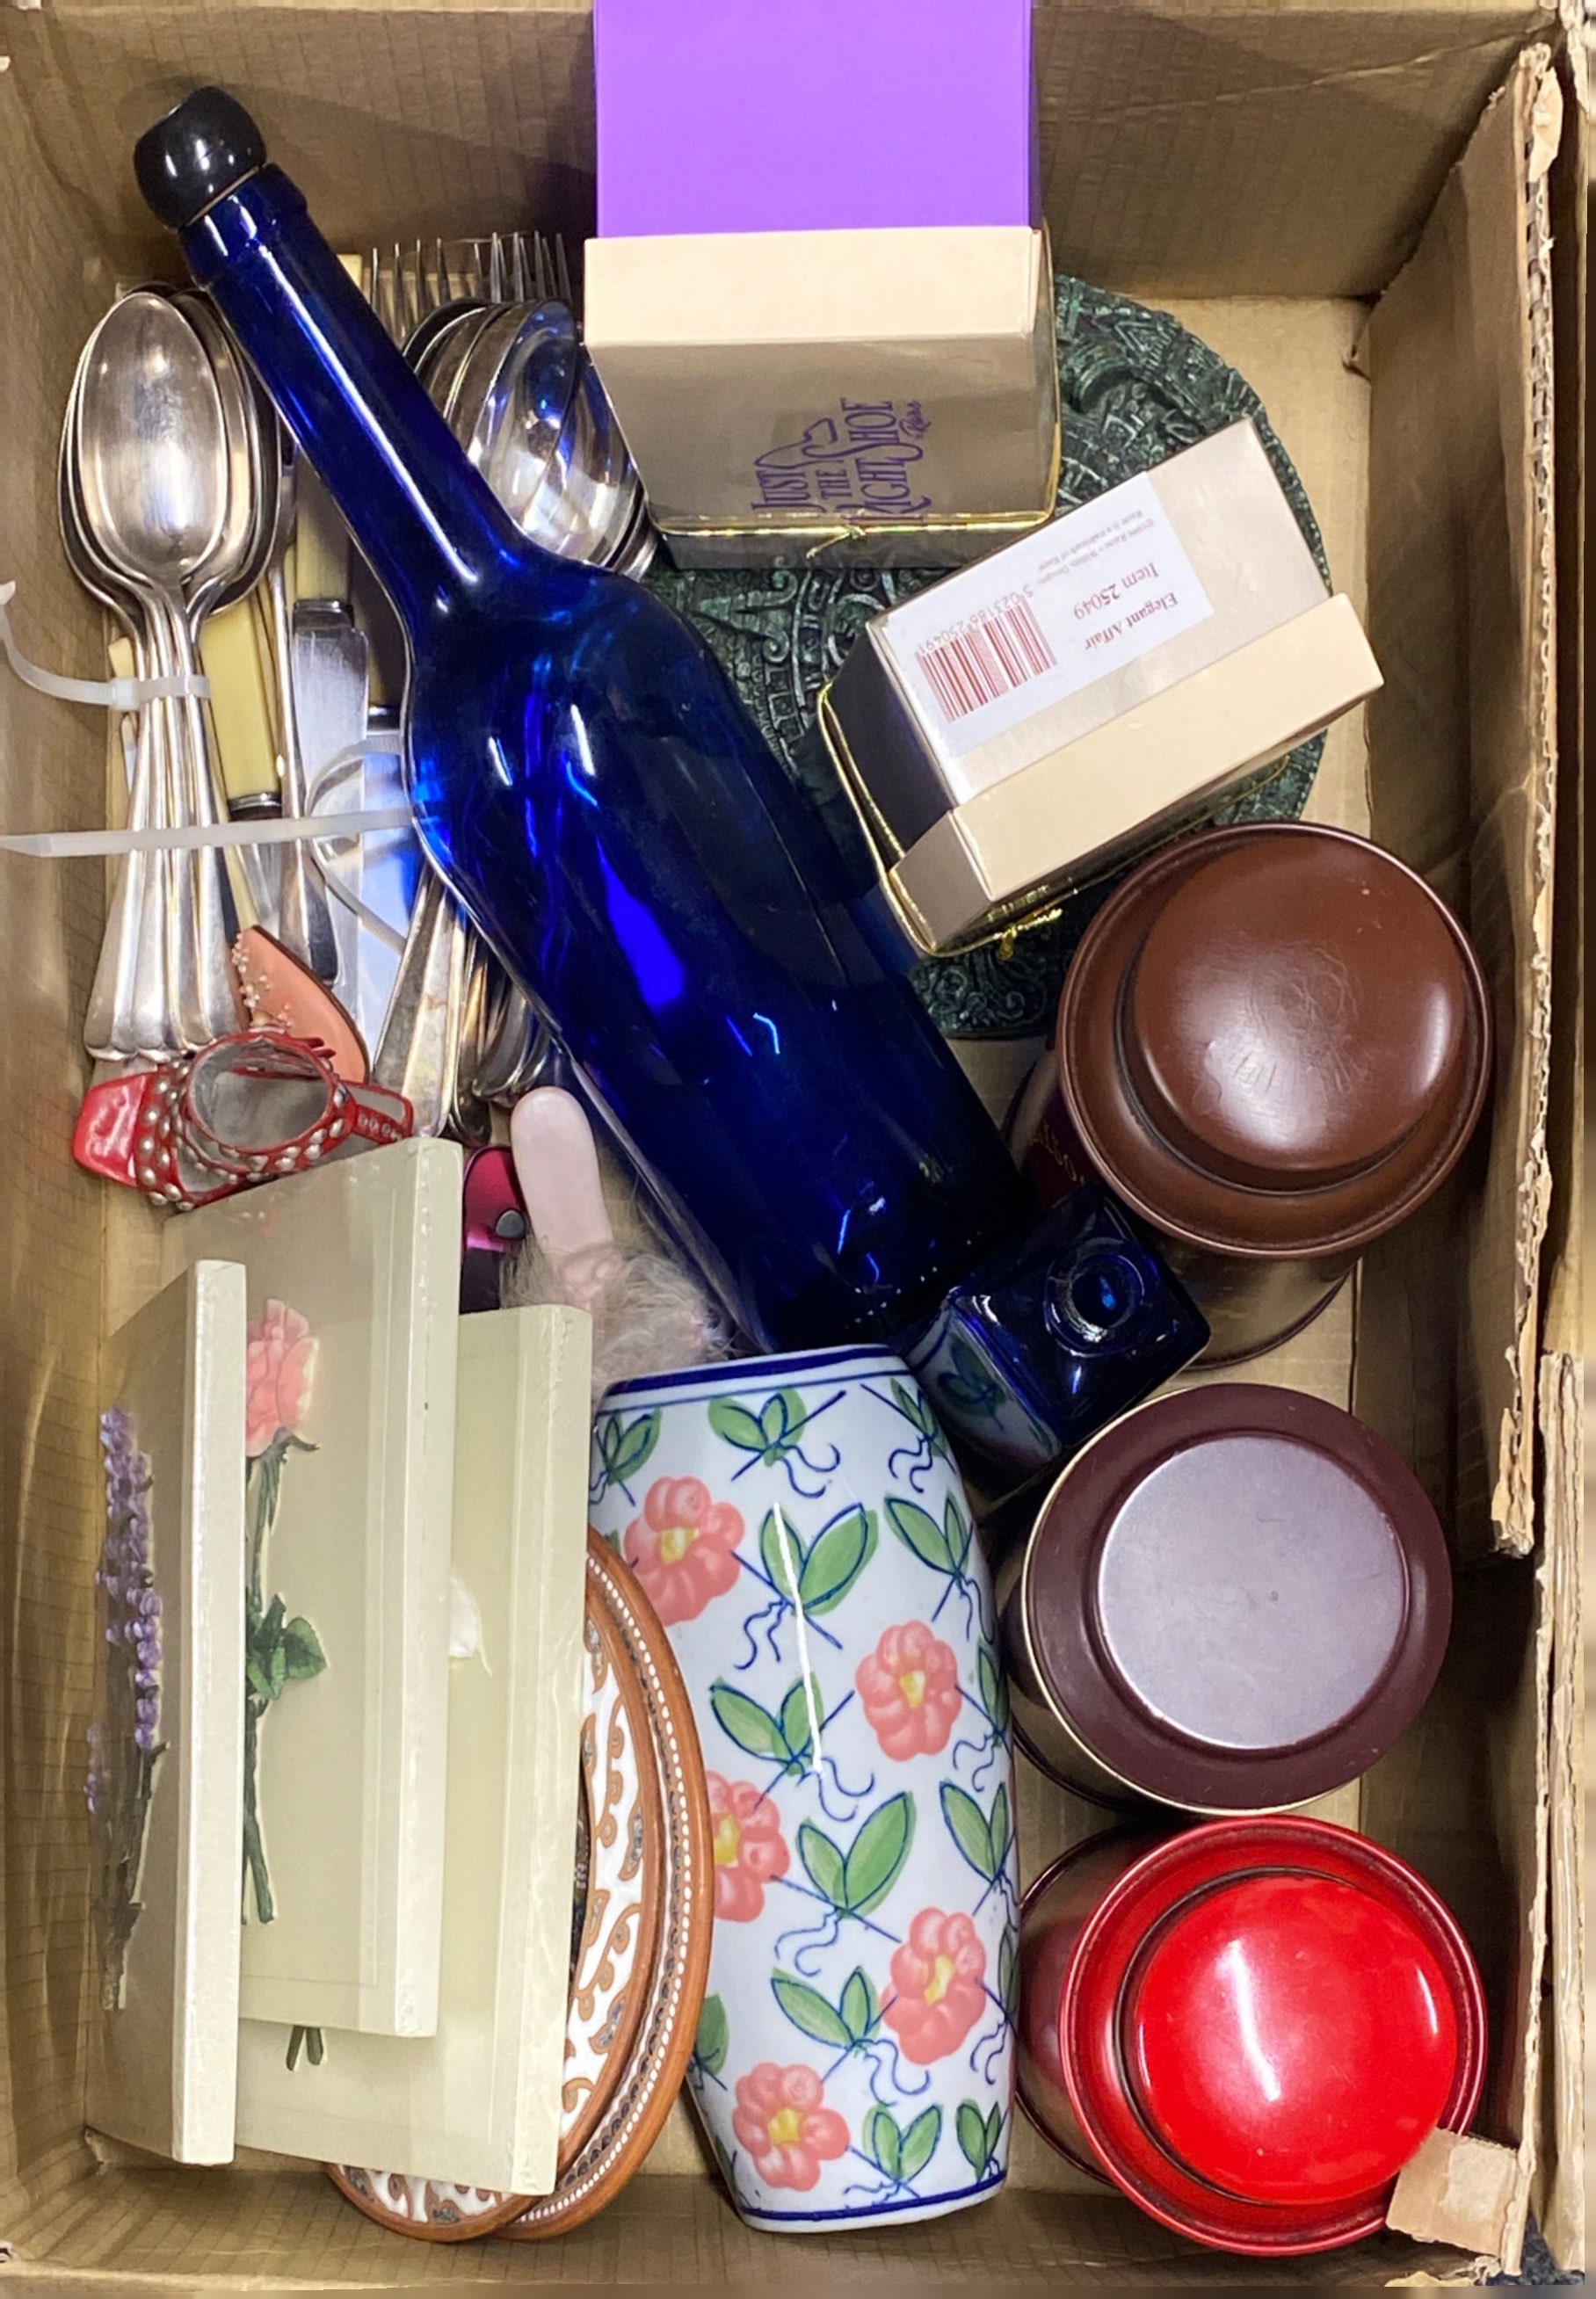 A box of mixed cutlery and other items.